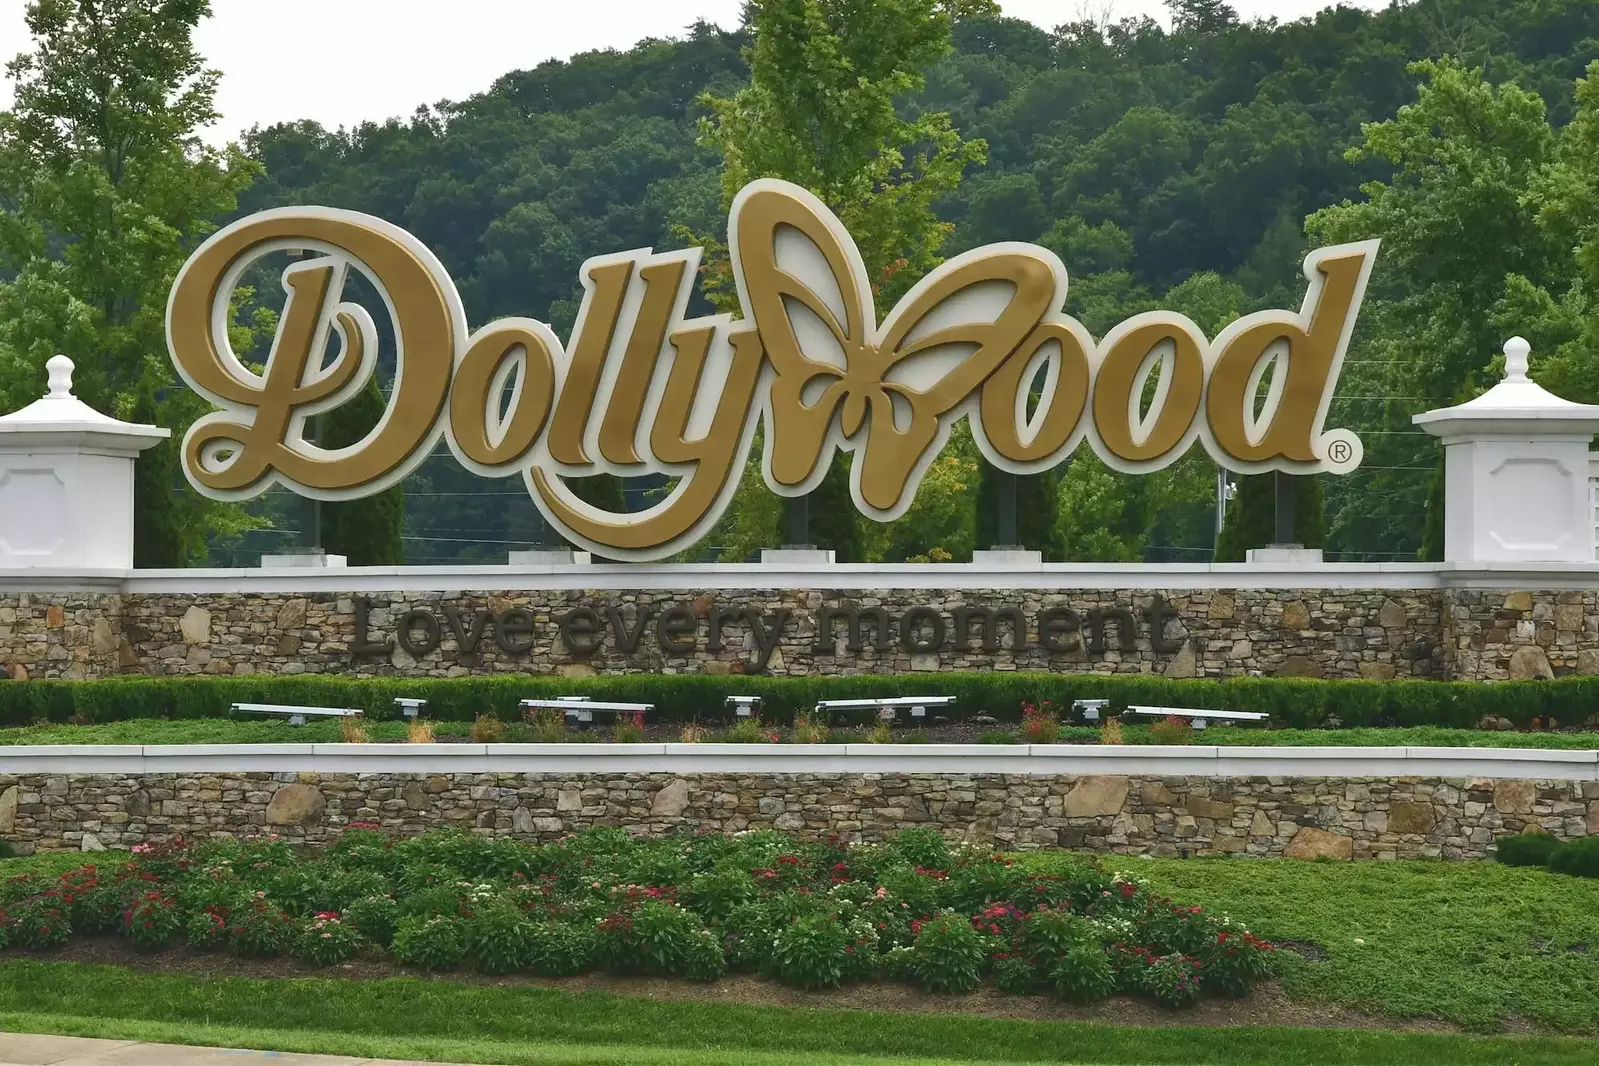 Dollywood in Pigeon Forge